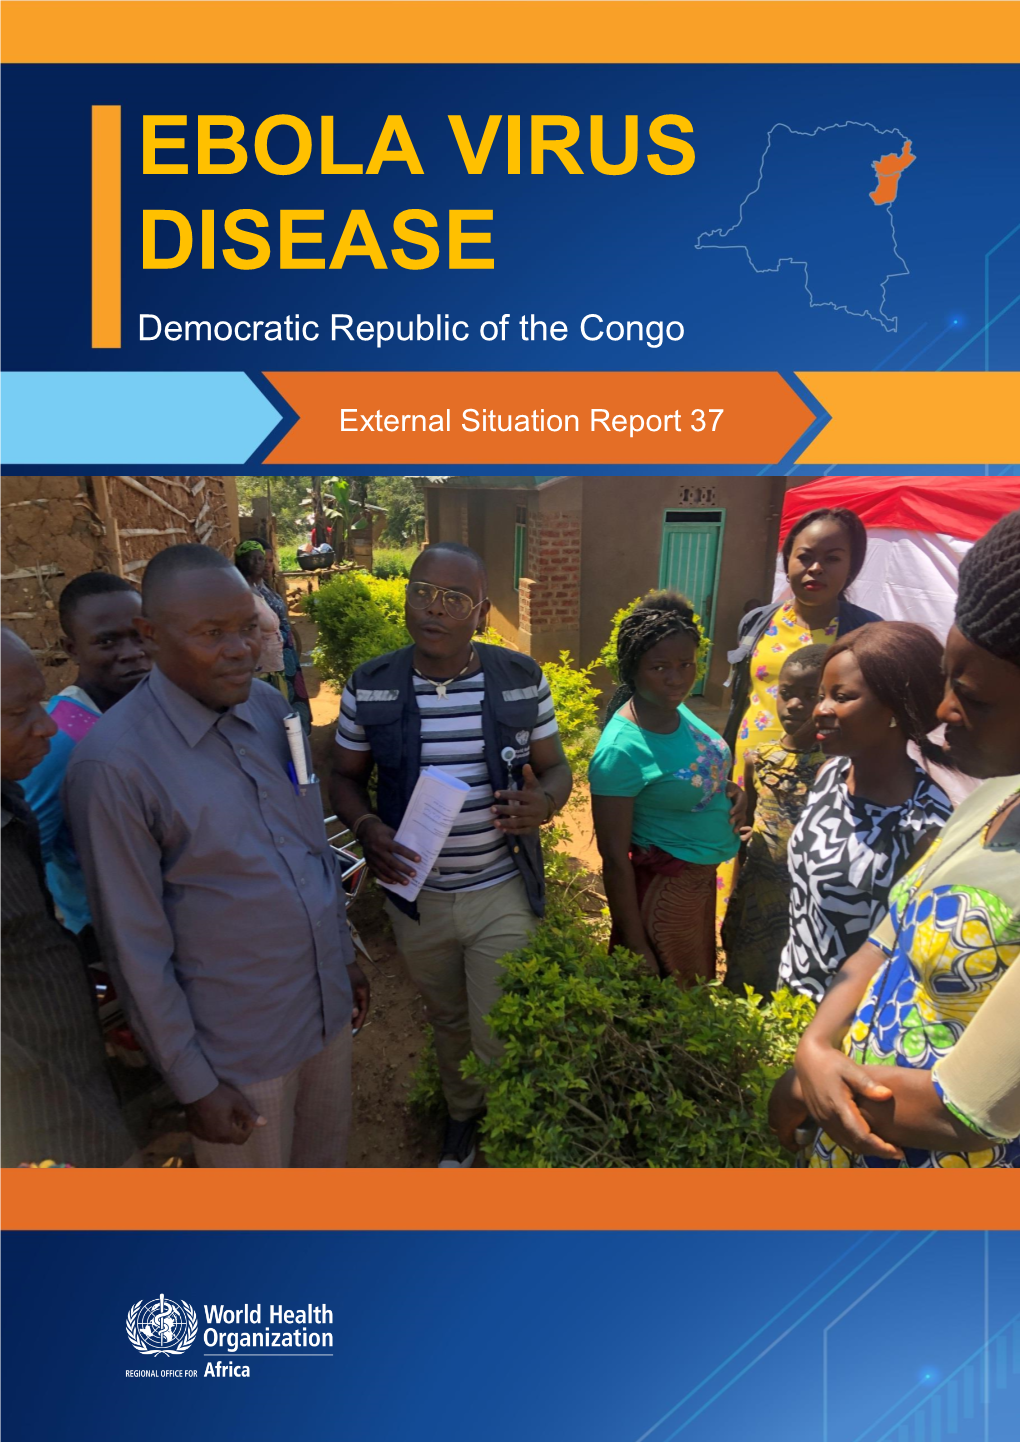 Ebola Virus Disease (EVD) Cases in the North Kivu and Ituri Provinces of the Democratic Republic of the Congo, with a Total of 110 New Confirmed Cases